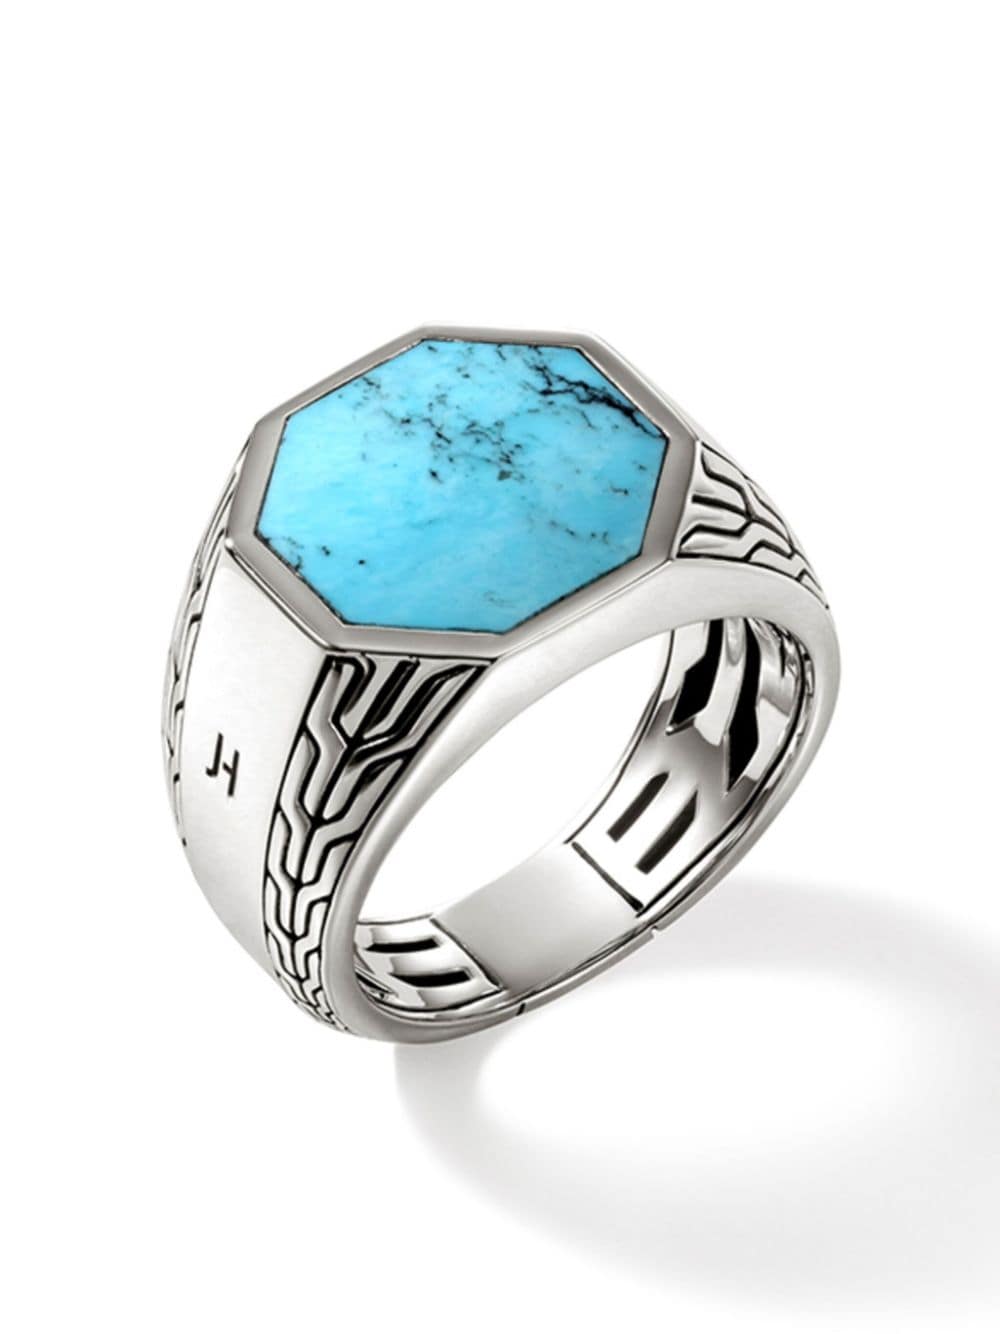 Shop John Hardy Sterling Silver Turquoise Signet Ring